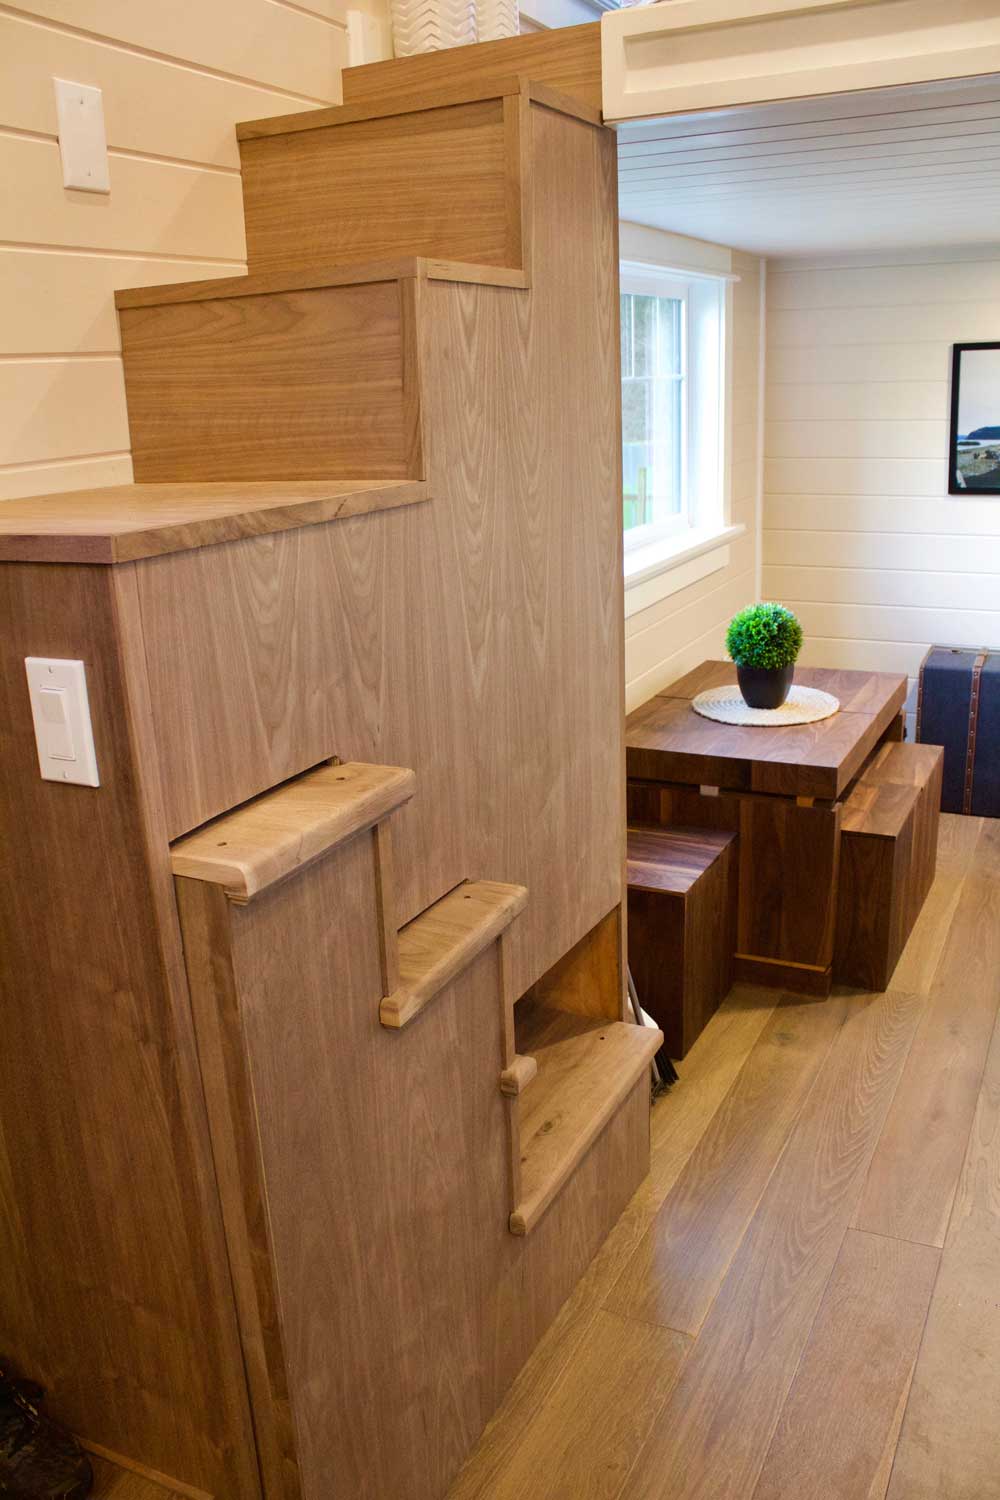 Collapsable stairs to a loft in the Tiny Craftsman Home